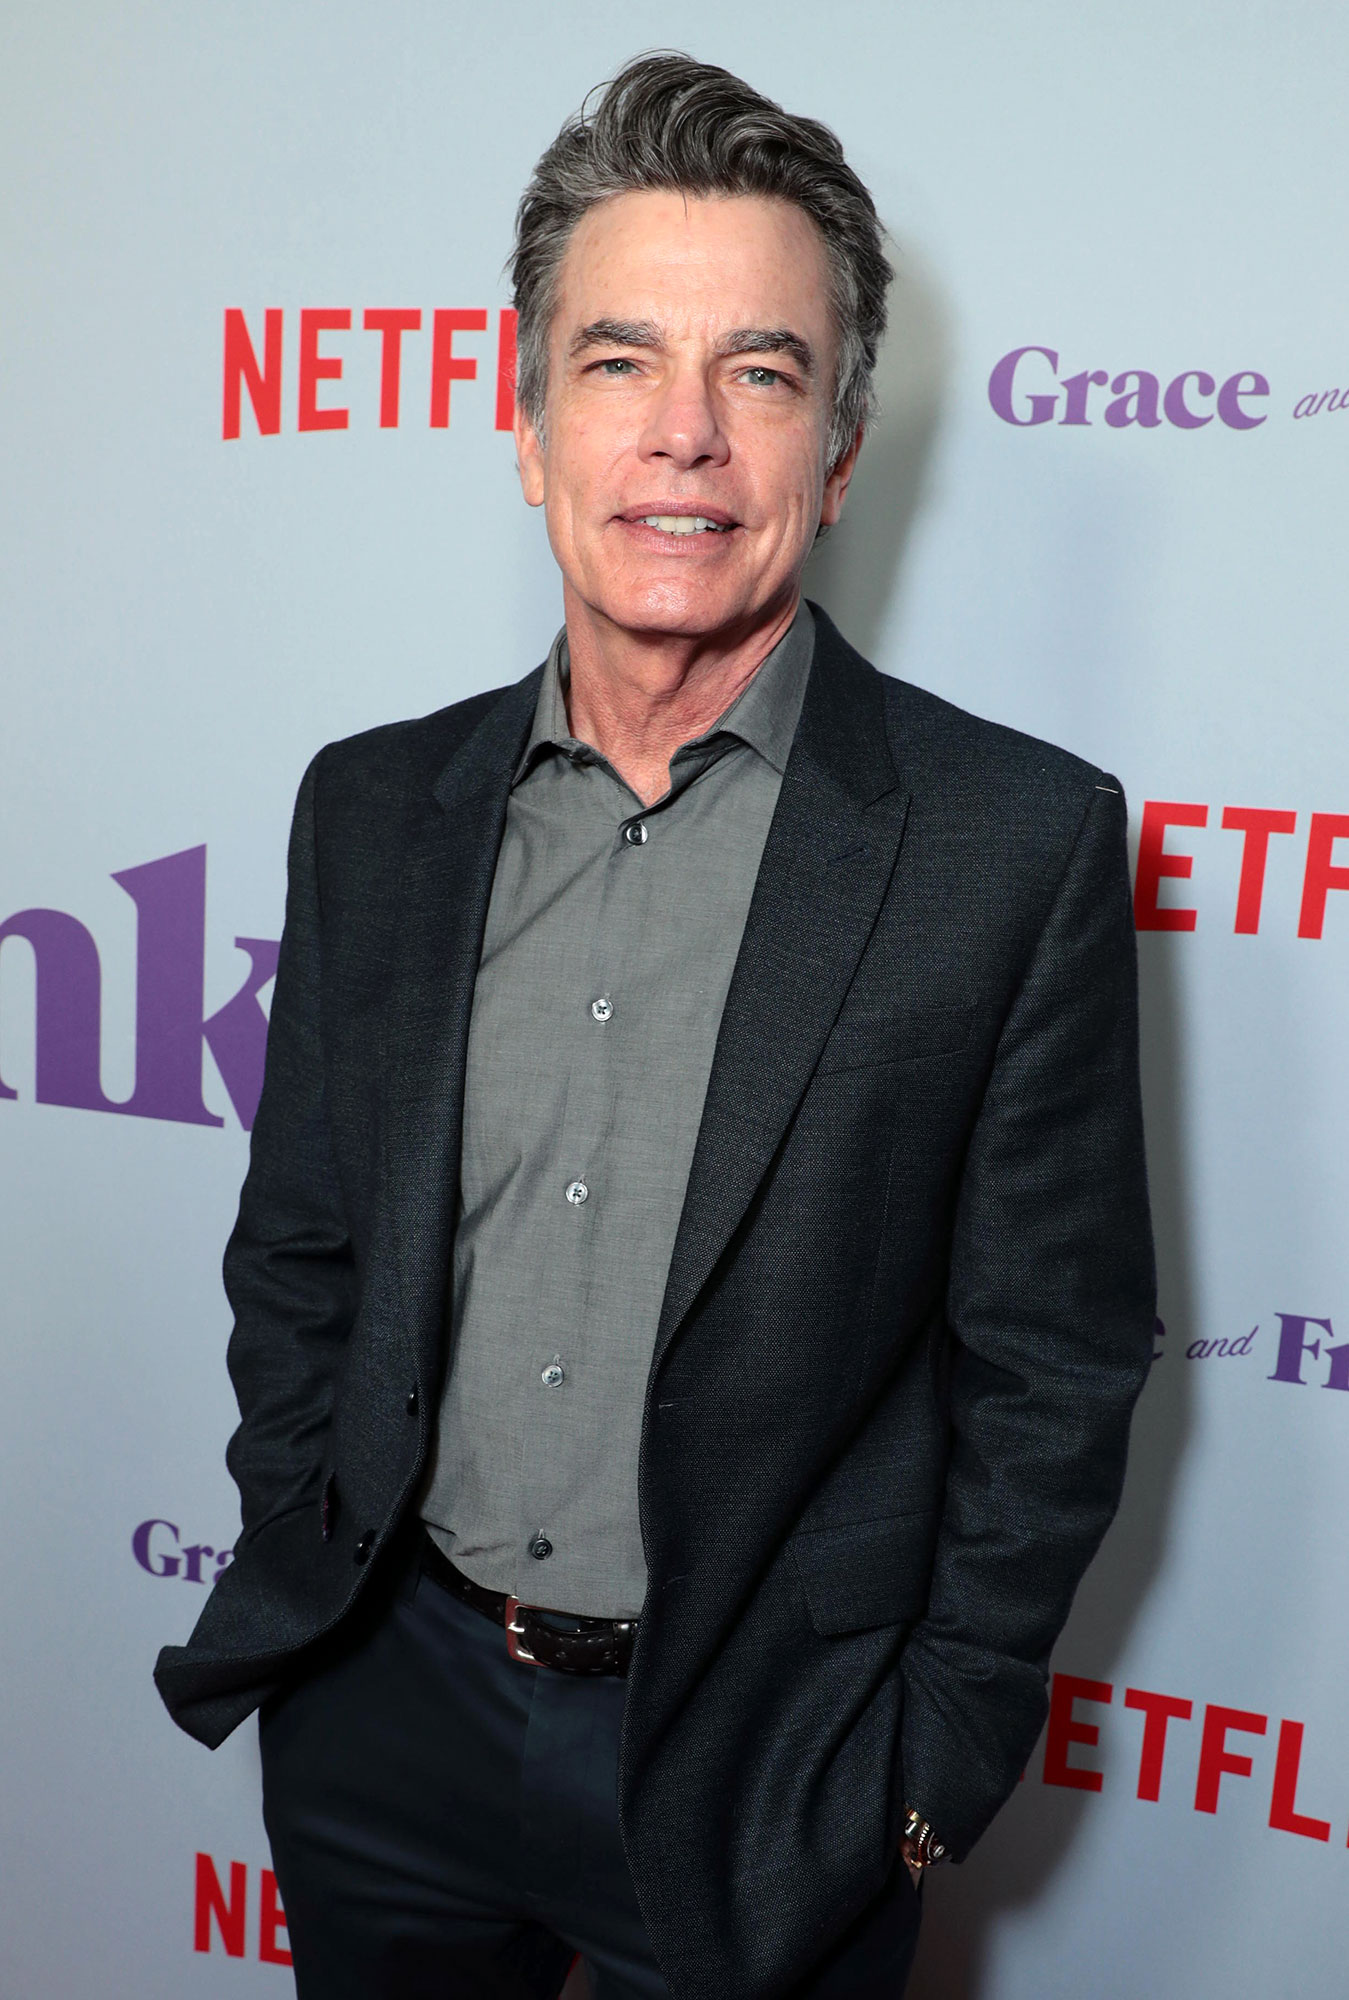 Peter Gallagher The OC Cast Dating Histories Through the Years